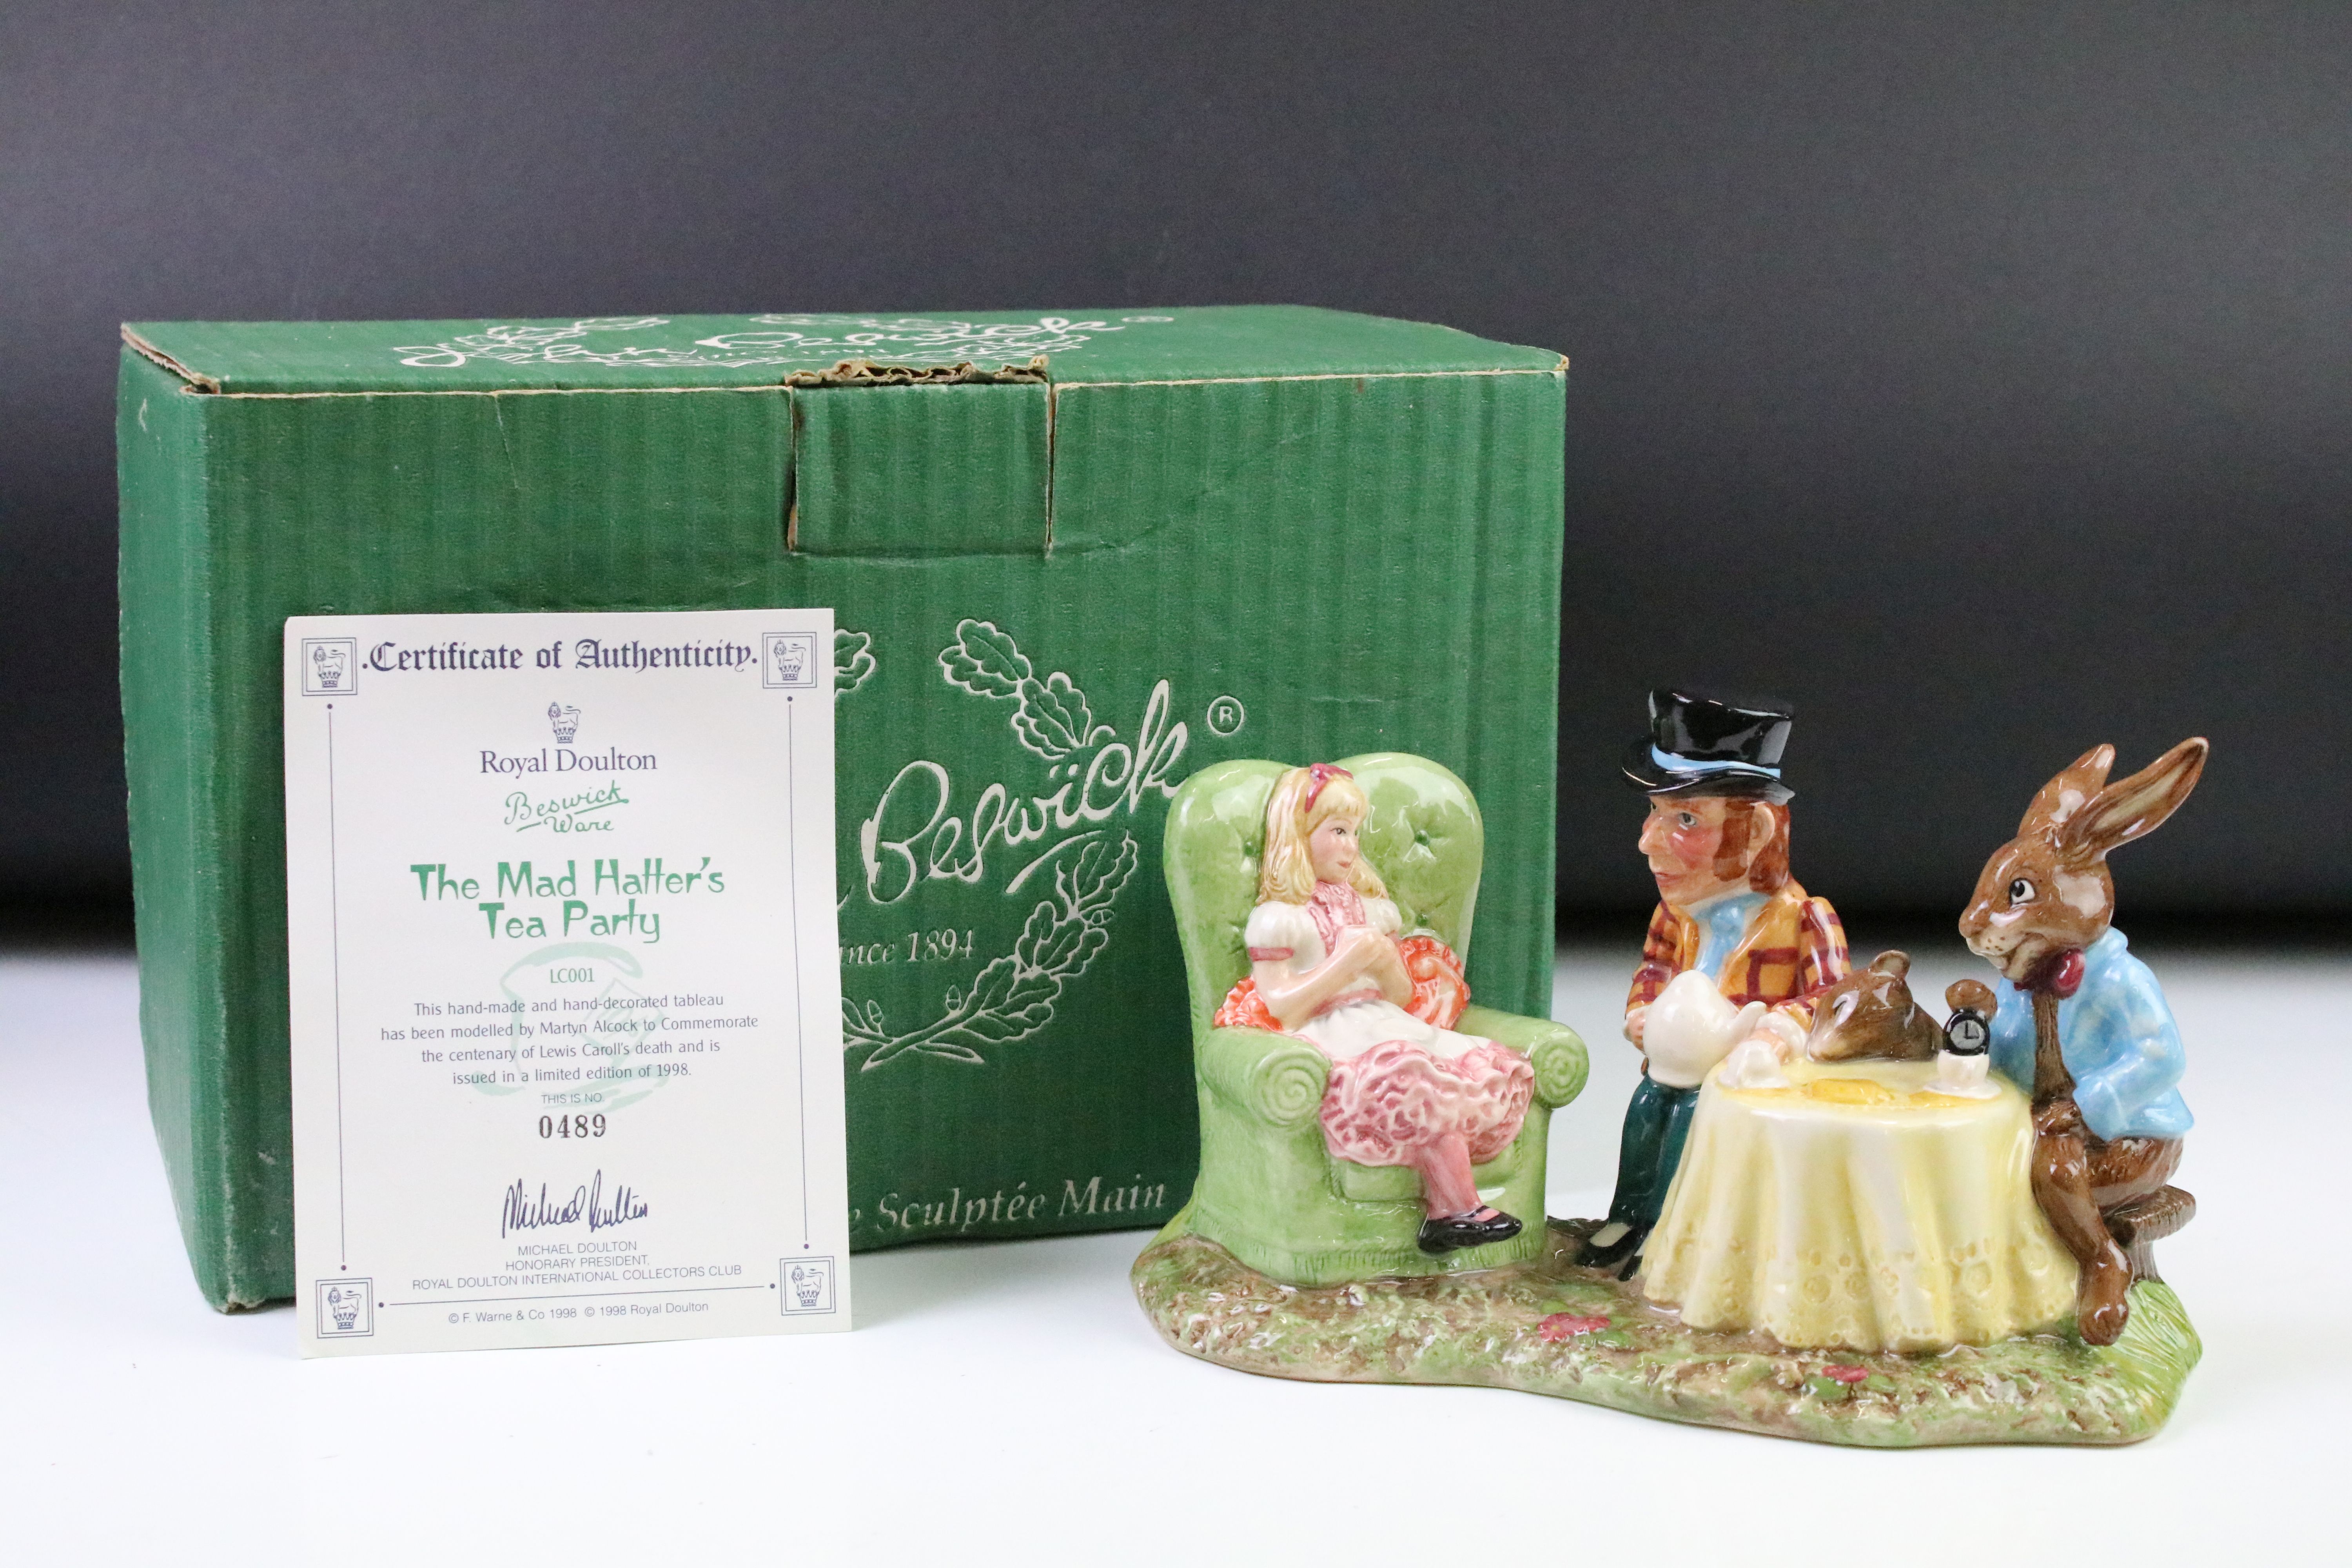 Royal Doulton Beswick ware ' The Mad Hatter's Tea Party ' figurine group in original box with - Image 2 of 9